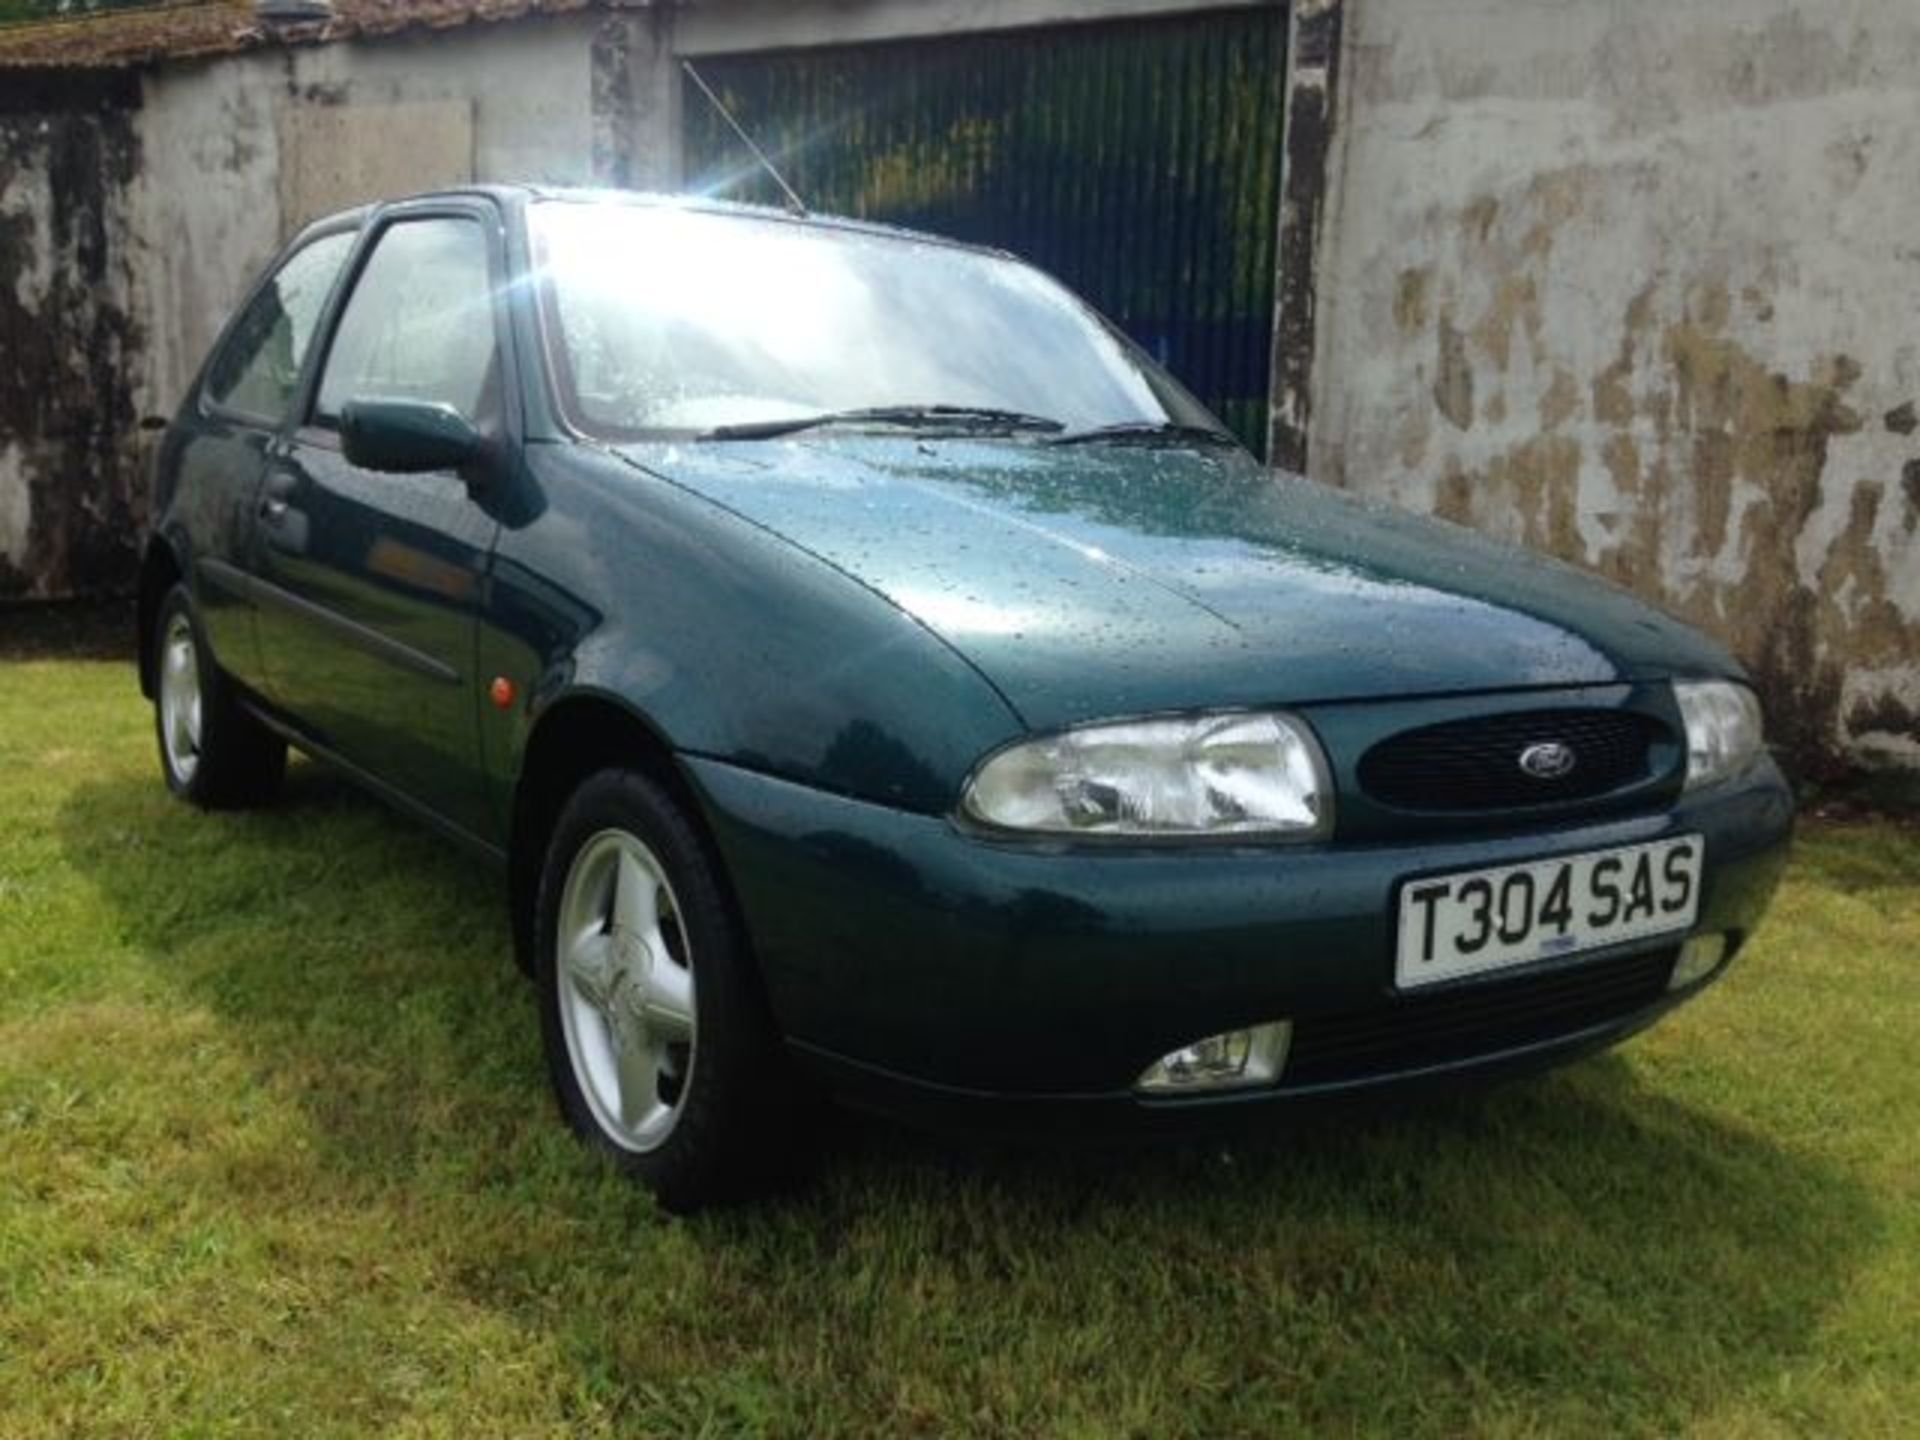 FORD, FIESTA ZETEC - 1388cc, Chassis number WF0BXXBAJBWU51655 - supplied new on March 26th 1999 as a